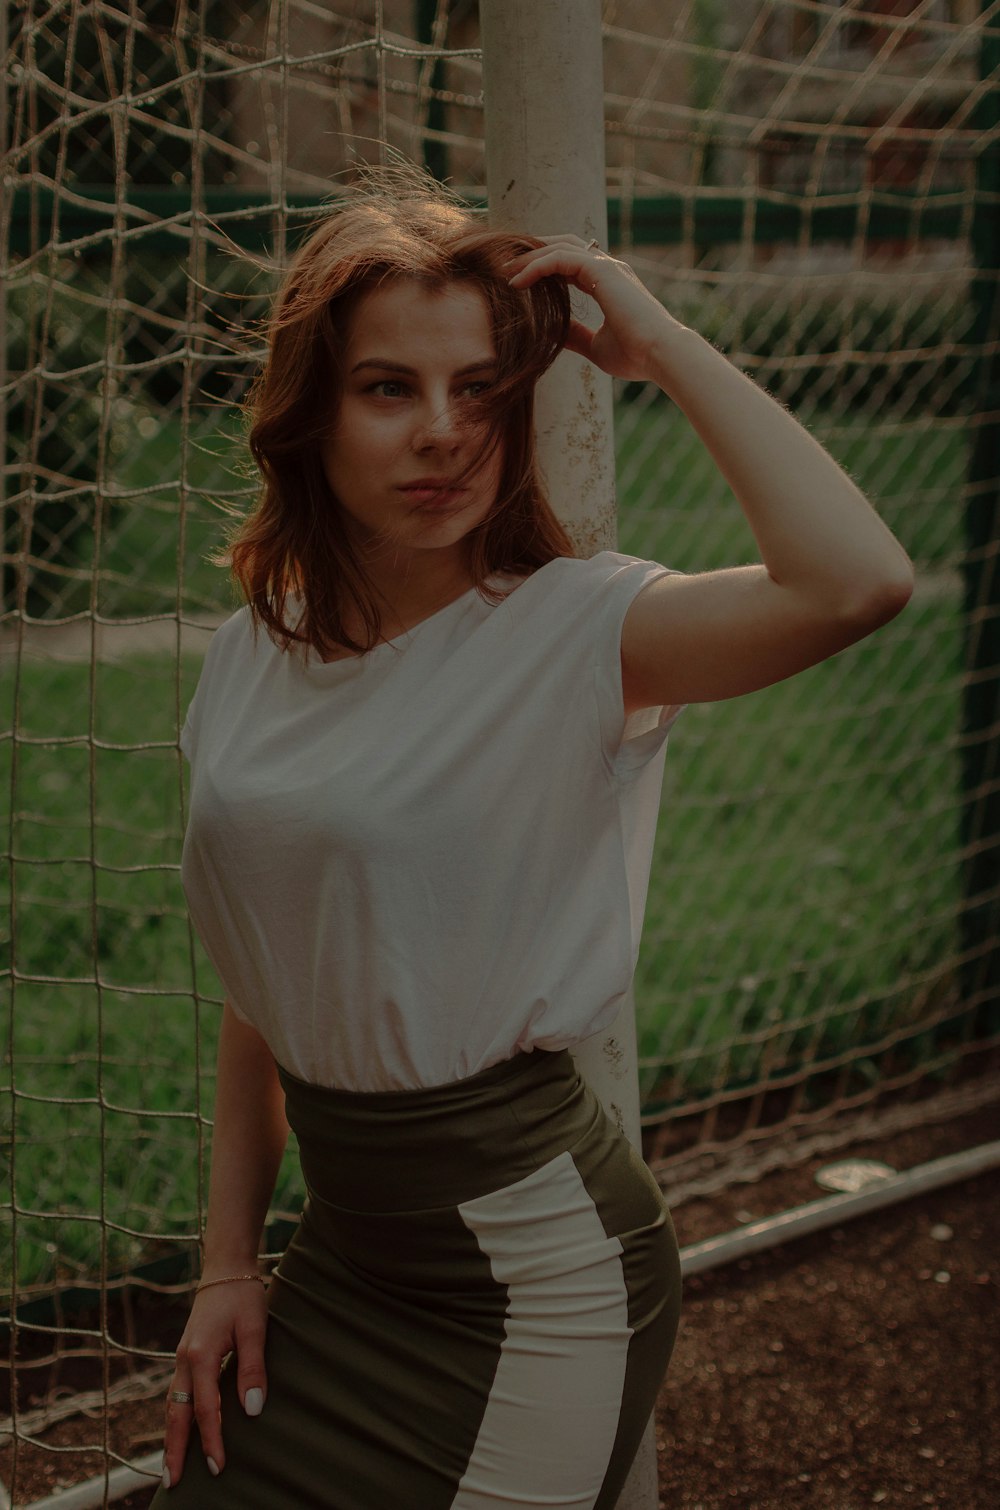 woman in white t-shirt and black shorts standing near fence during daytime